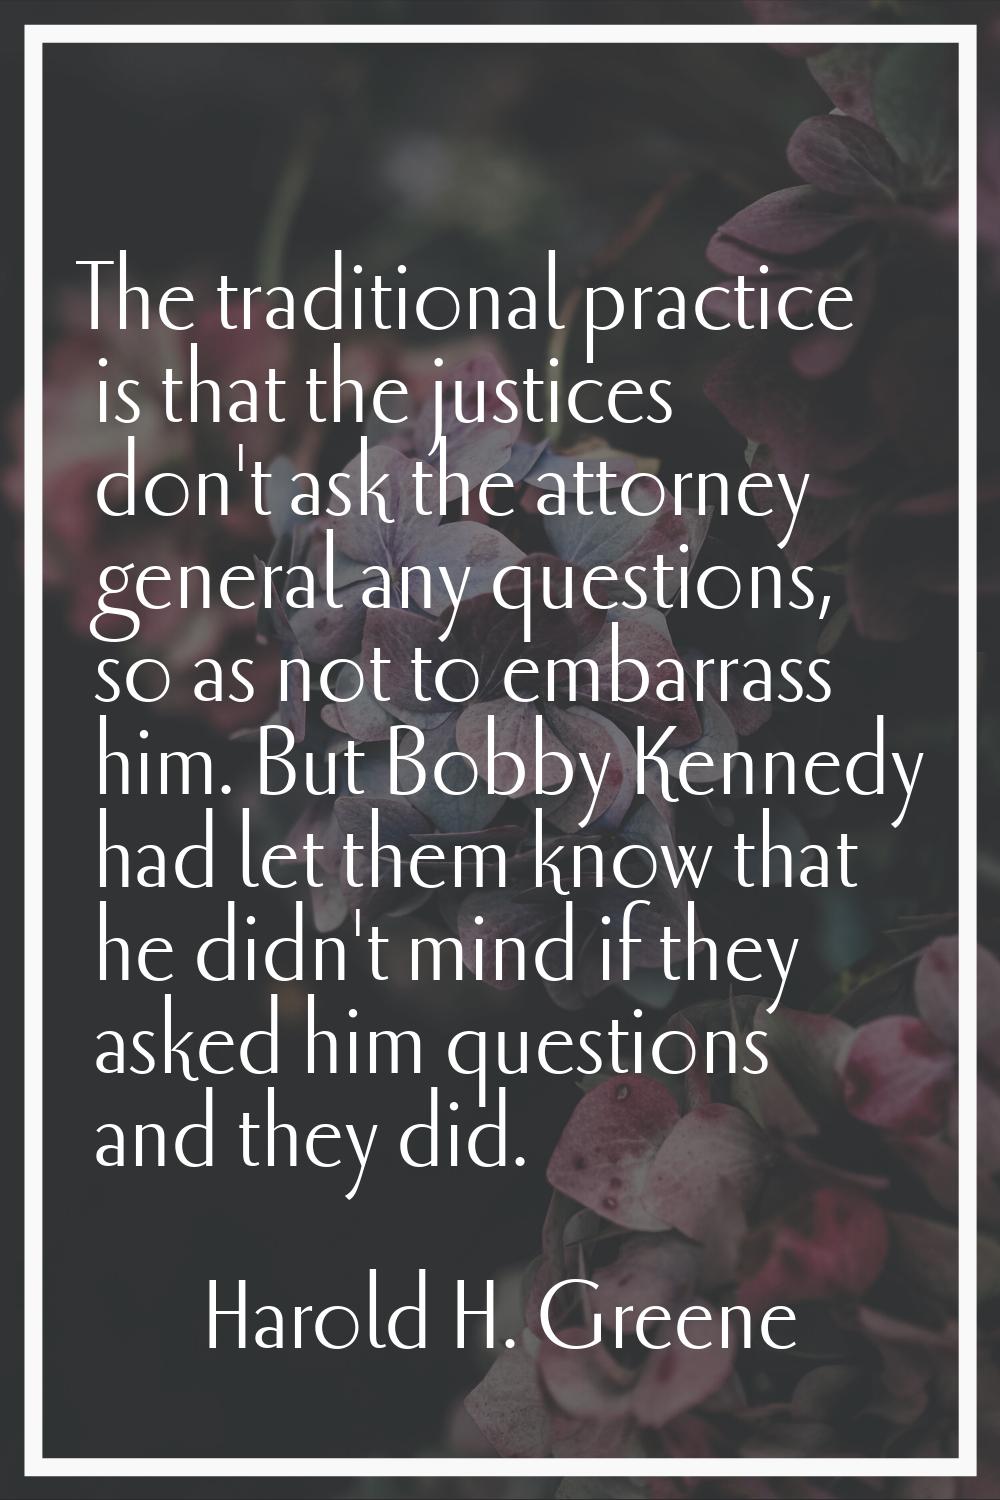 The traditional practice is that the justices don't ask the attorney general any questions, so as n